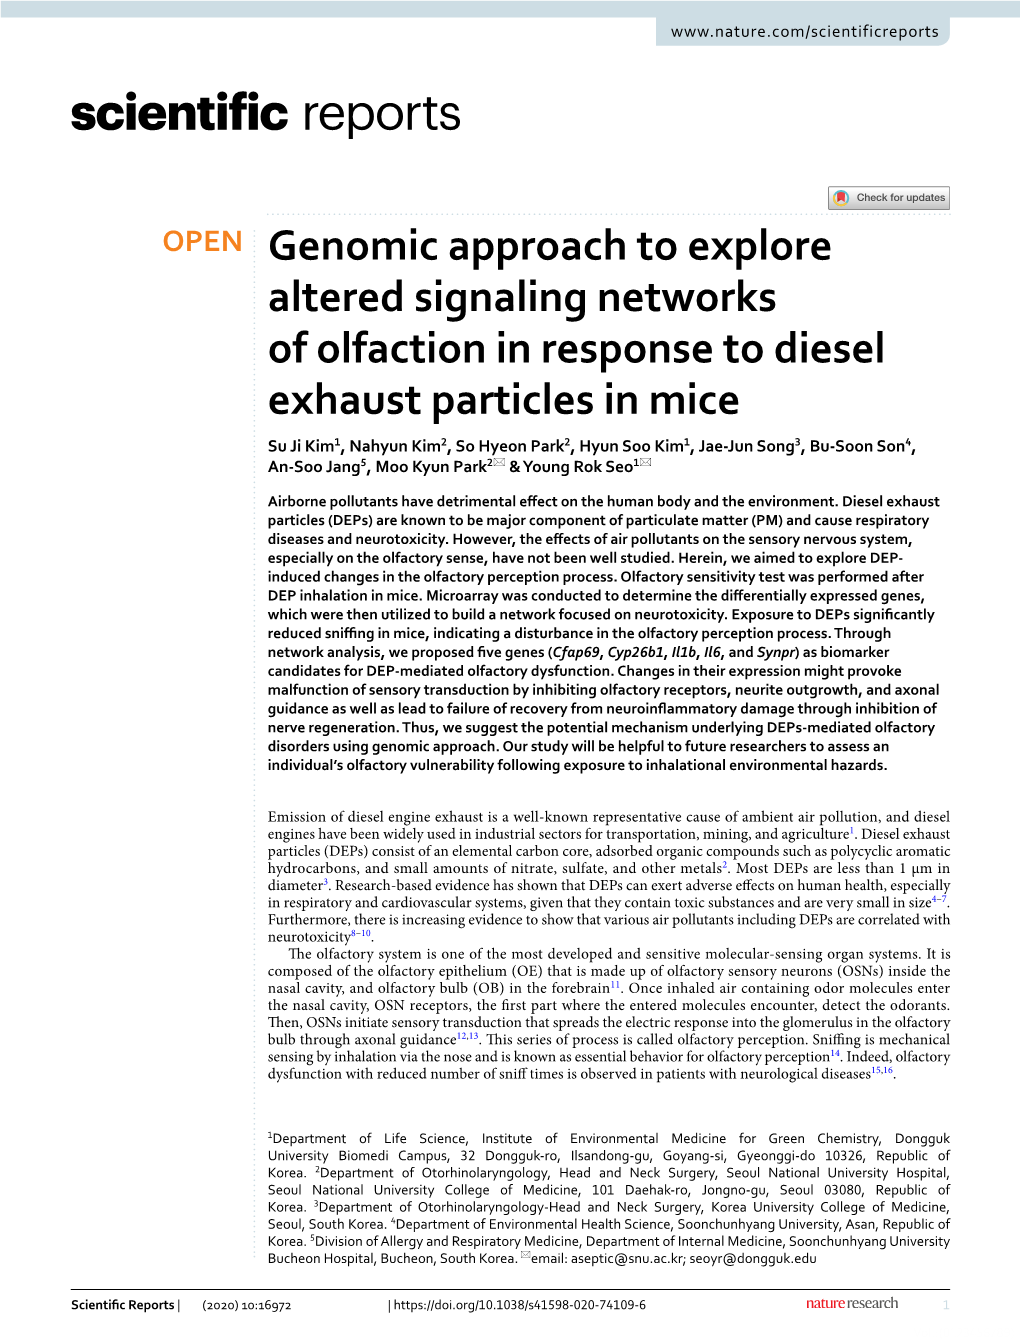 Genomic Approach to Explore Altered Signaling Networks of Olfaction In